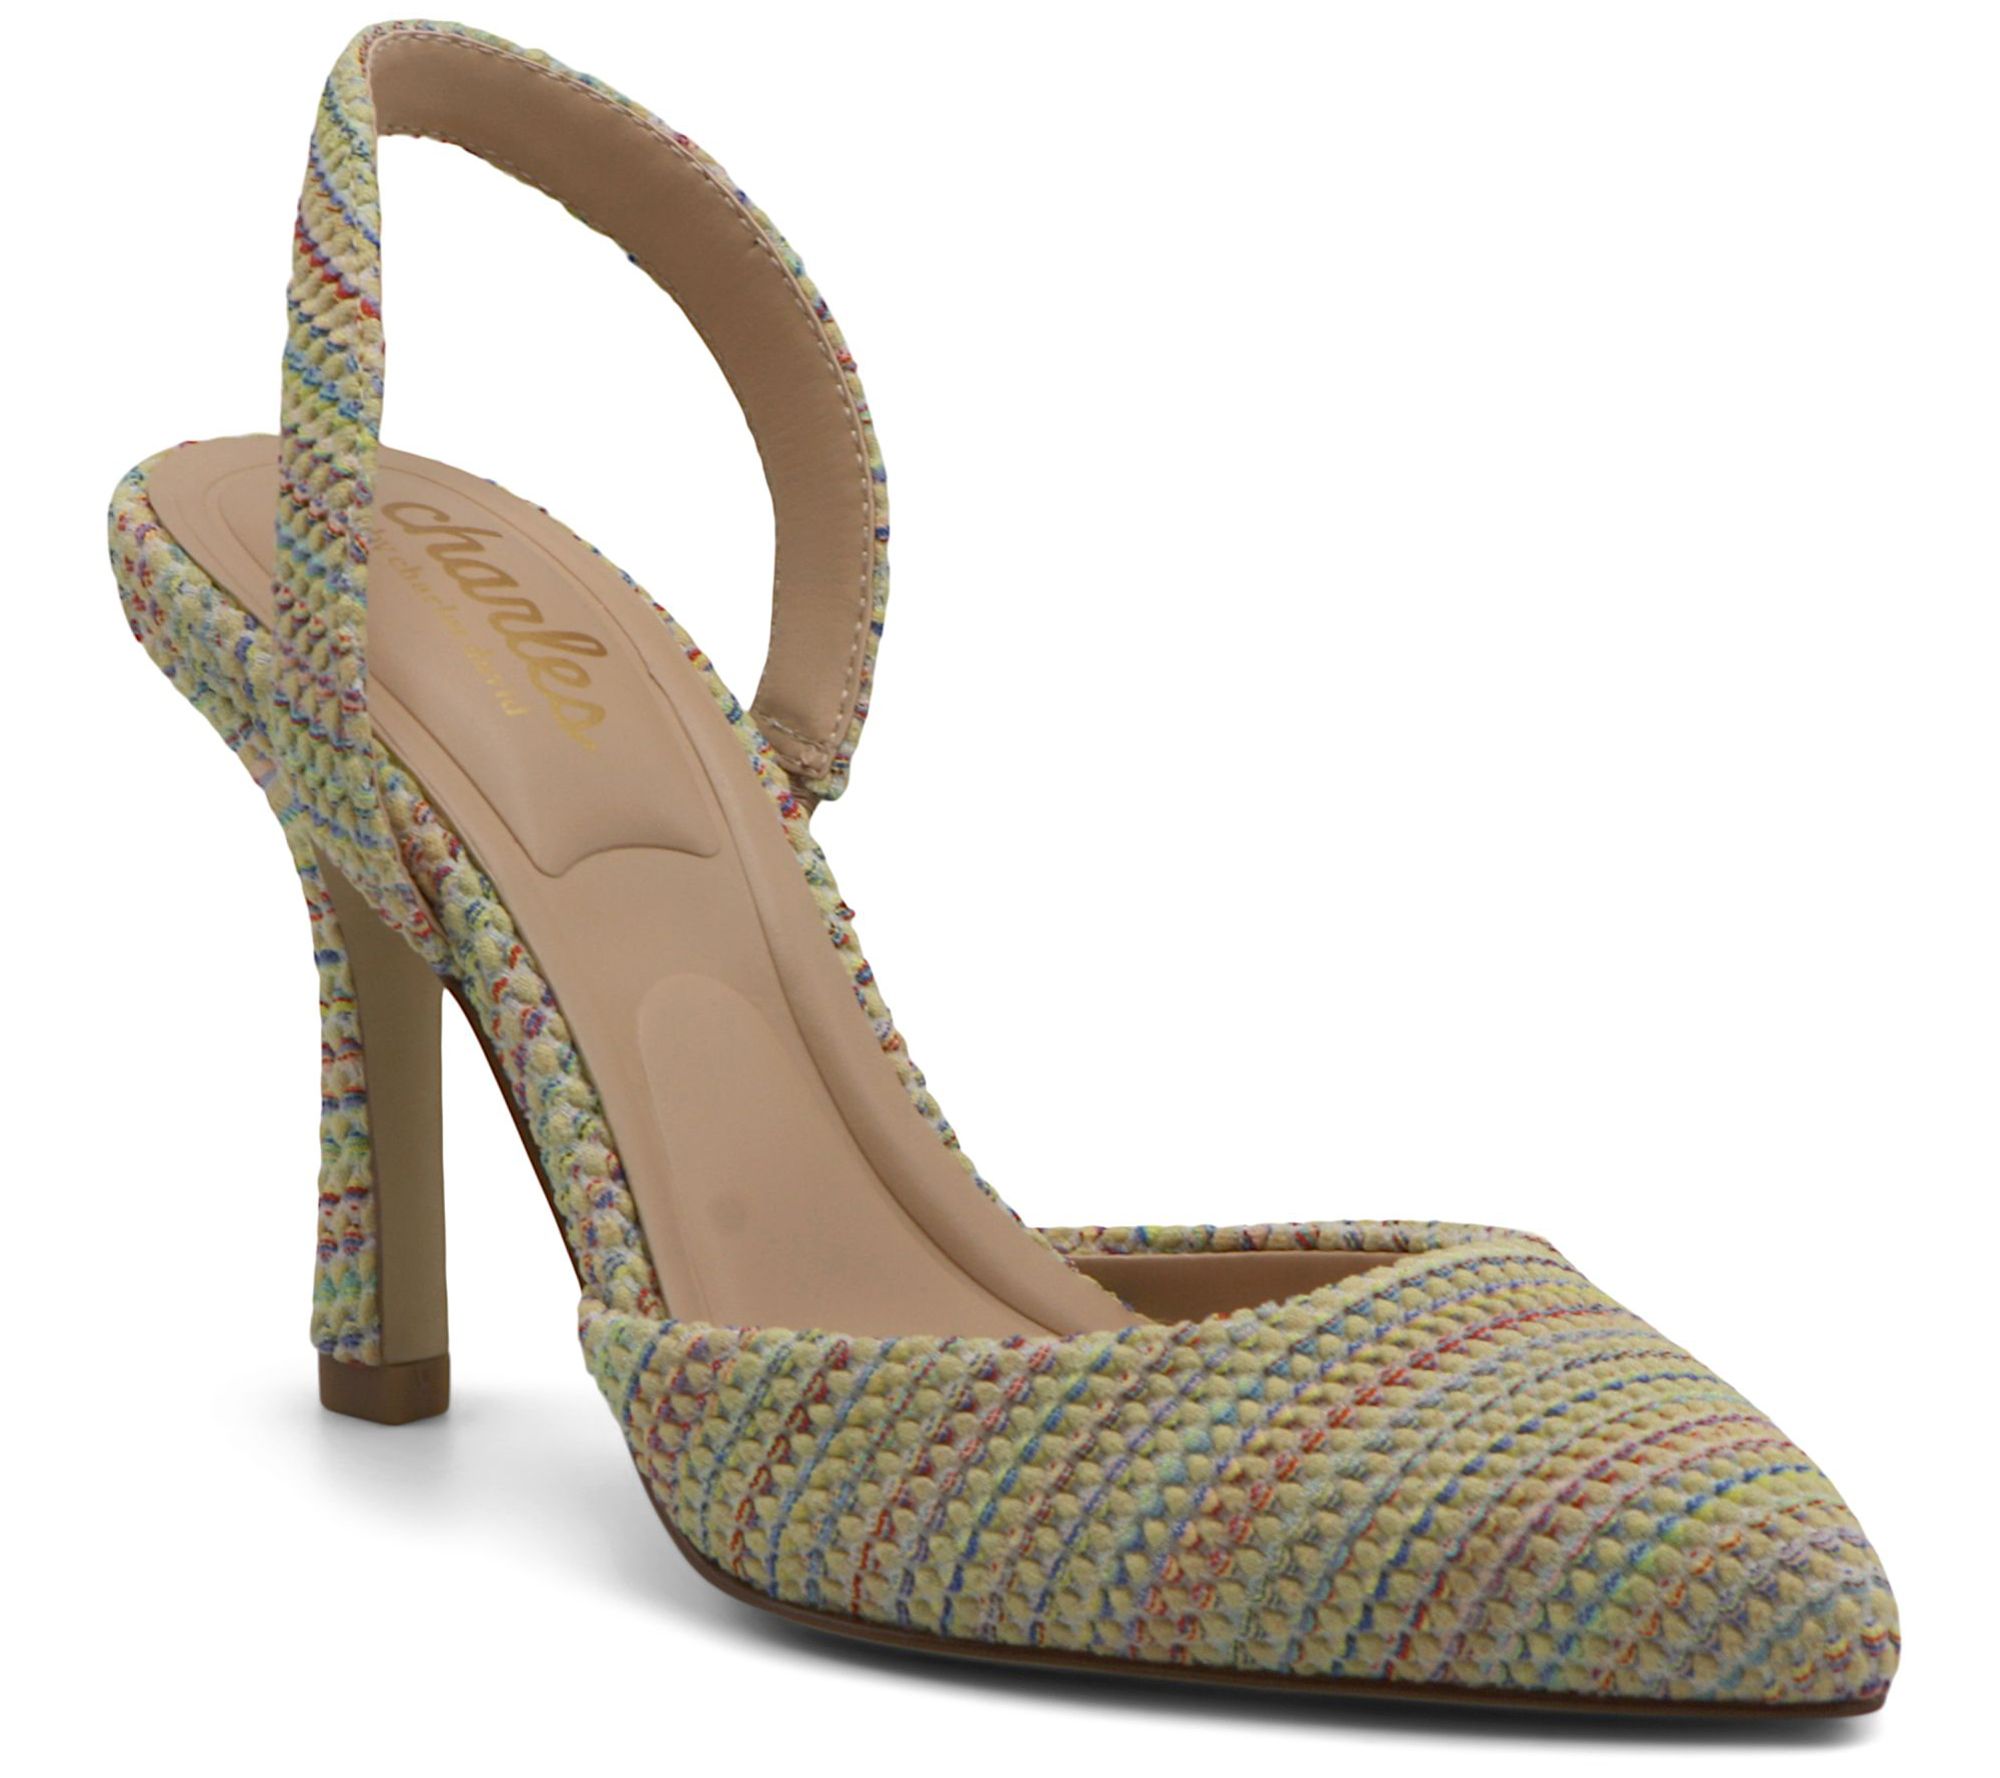 Green Woven Slingback Pumps | CHARLES & KEITH